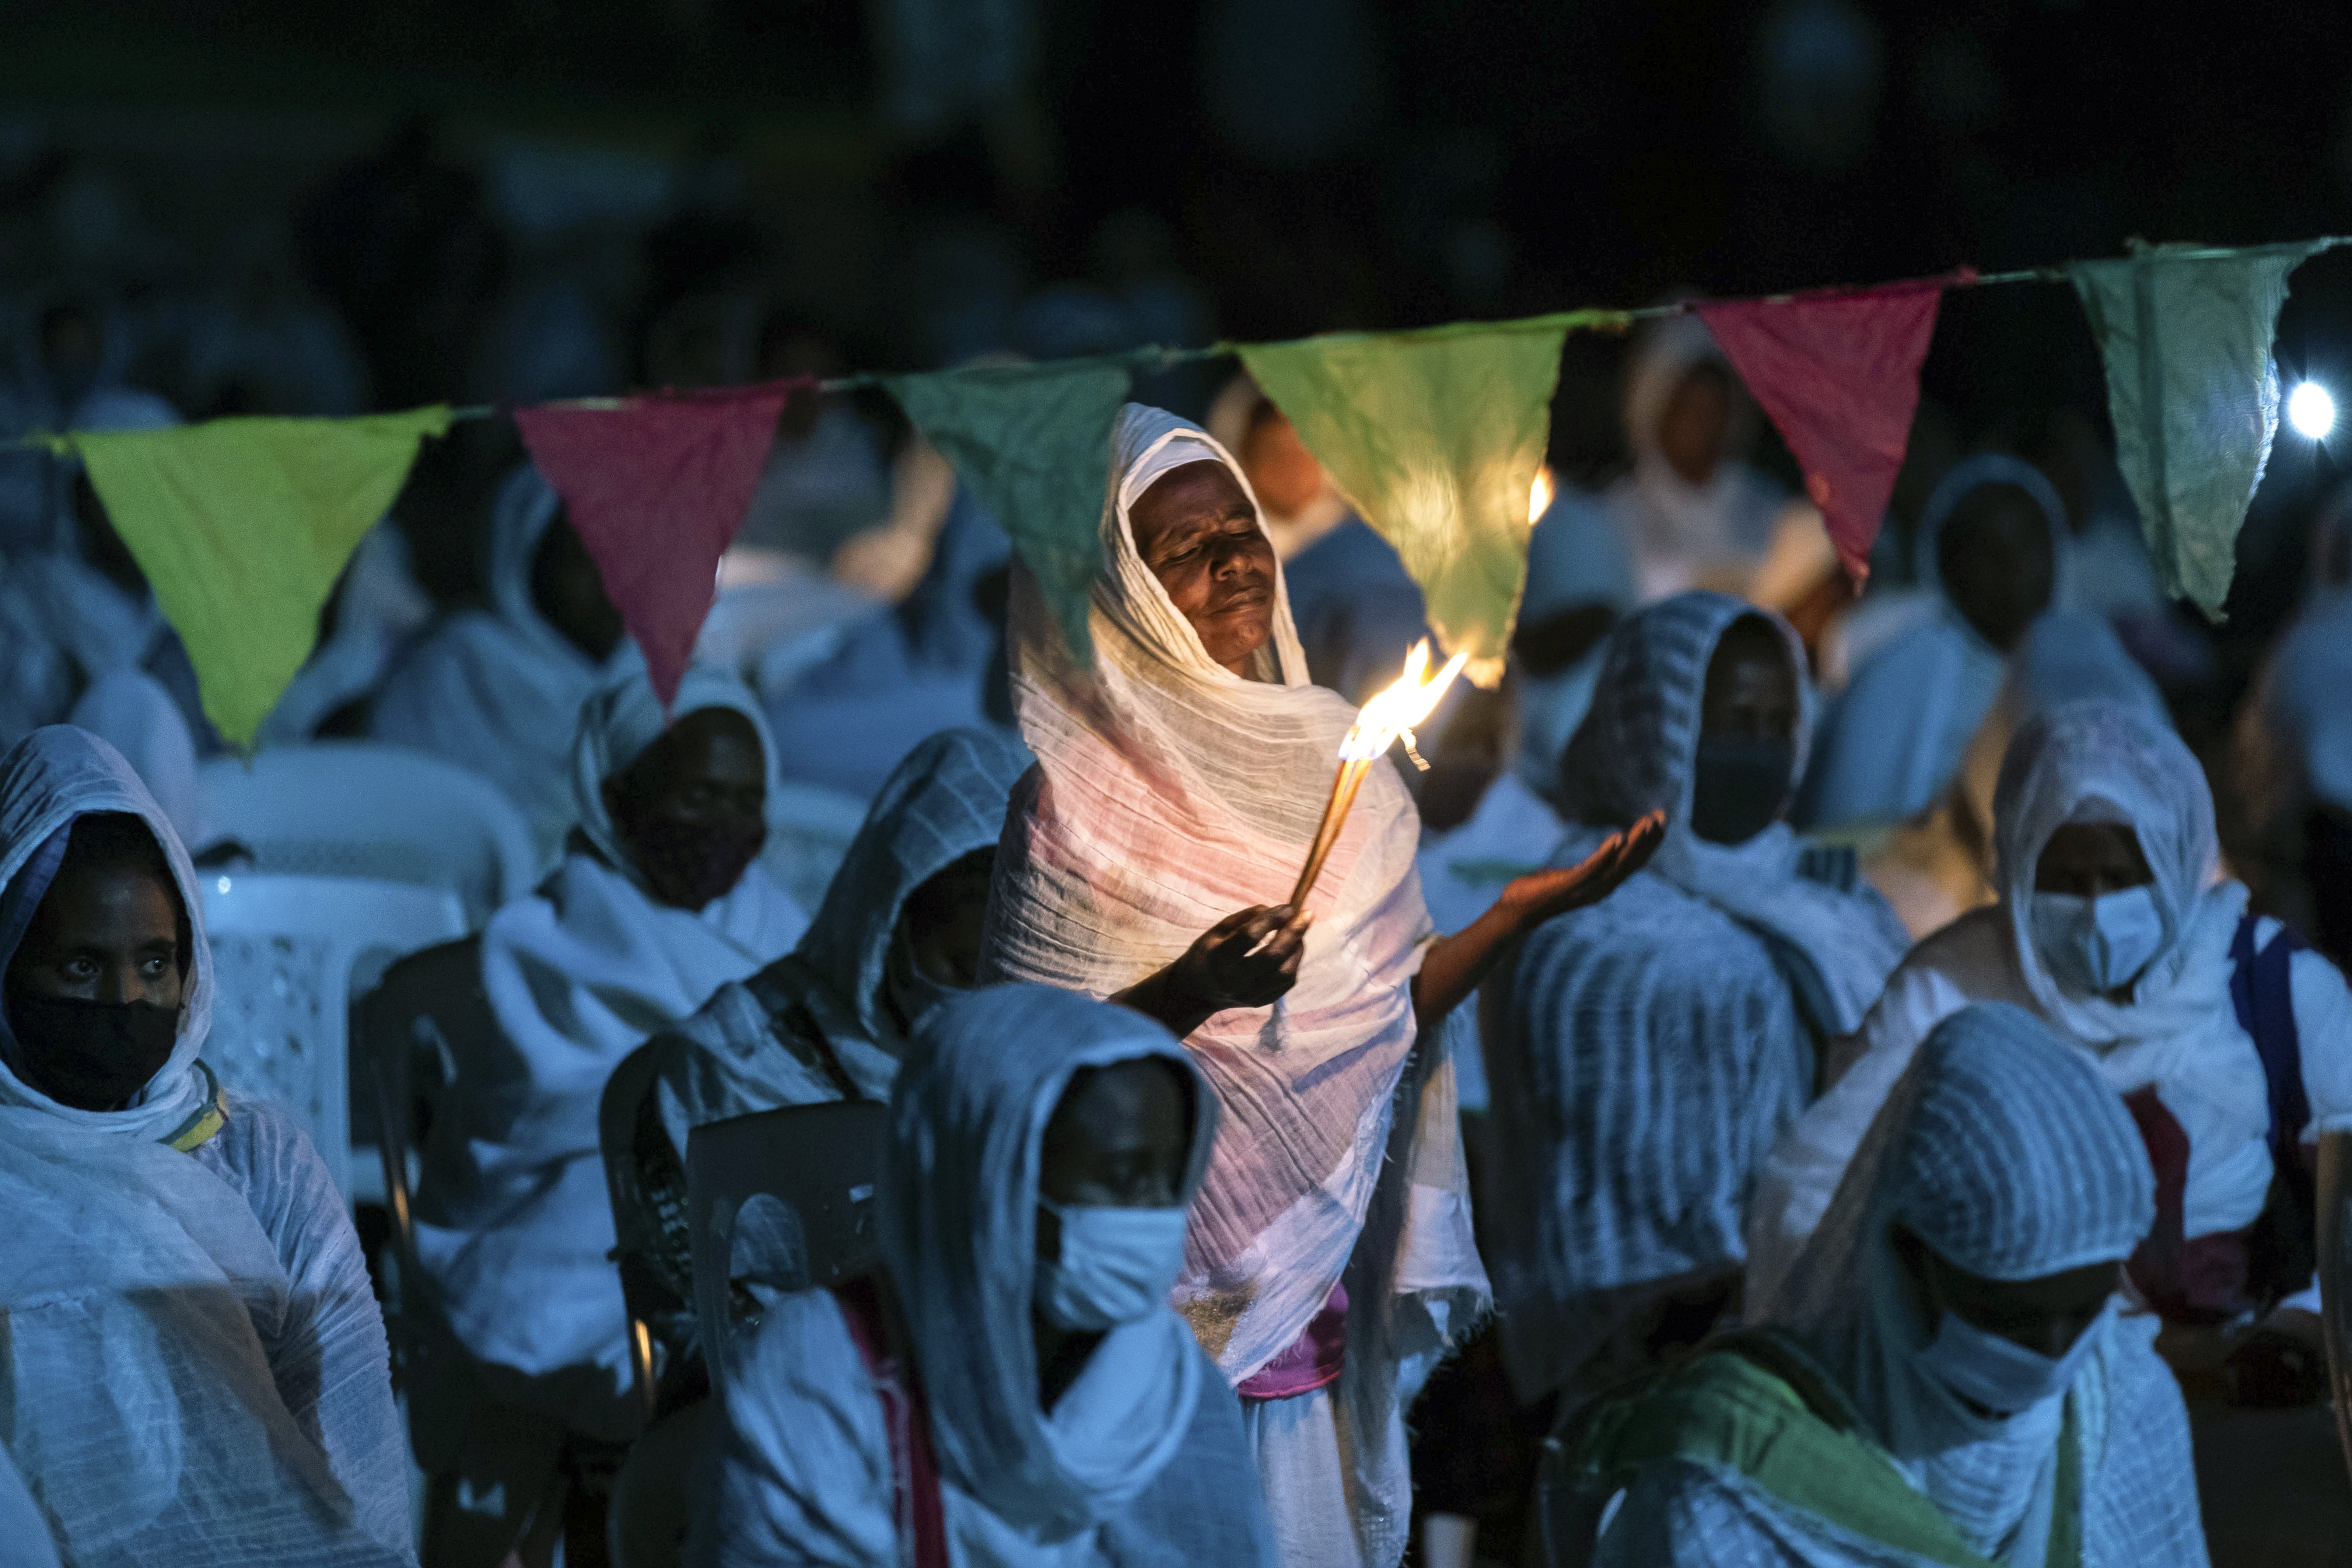 Ethiopian Orthodox Christians light candles and pray for peace during a church service at the Medhane Alem Cathedral in the Bole Medhanealem area of the capital. Ethiopia's powerful Tigray region asserts that fighter jets have bombed locations around its capital, Mekele, aiming to force the region "into submission," while Ethiopia's army says it has been forced into an "unexpected and aimless war," Addis Ababa, Ethiopia, Nov. 5, 2020 (AP Photo/Mulugeta Ayene)